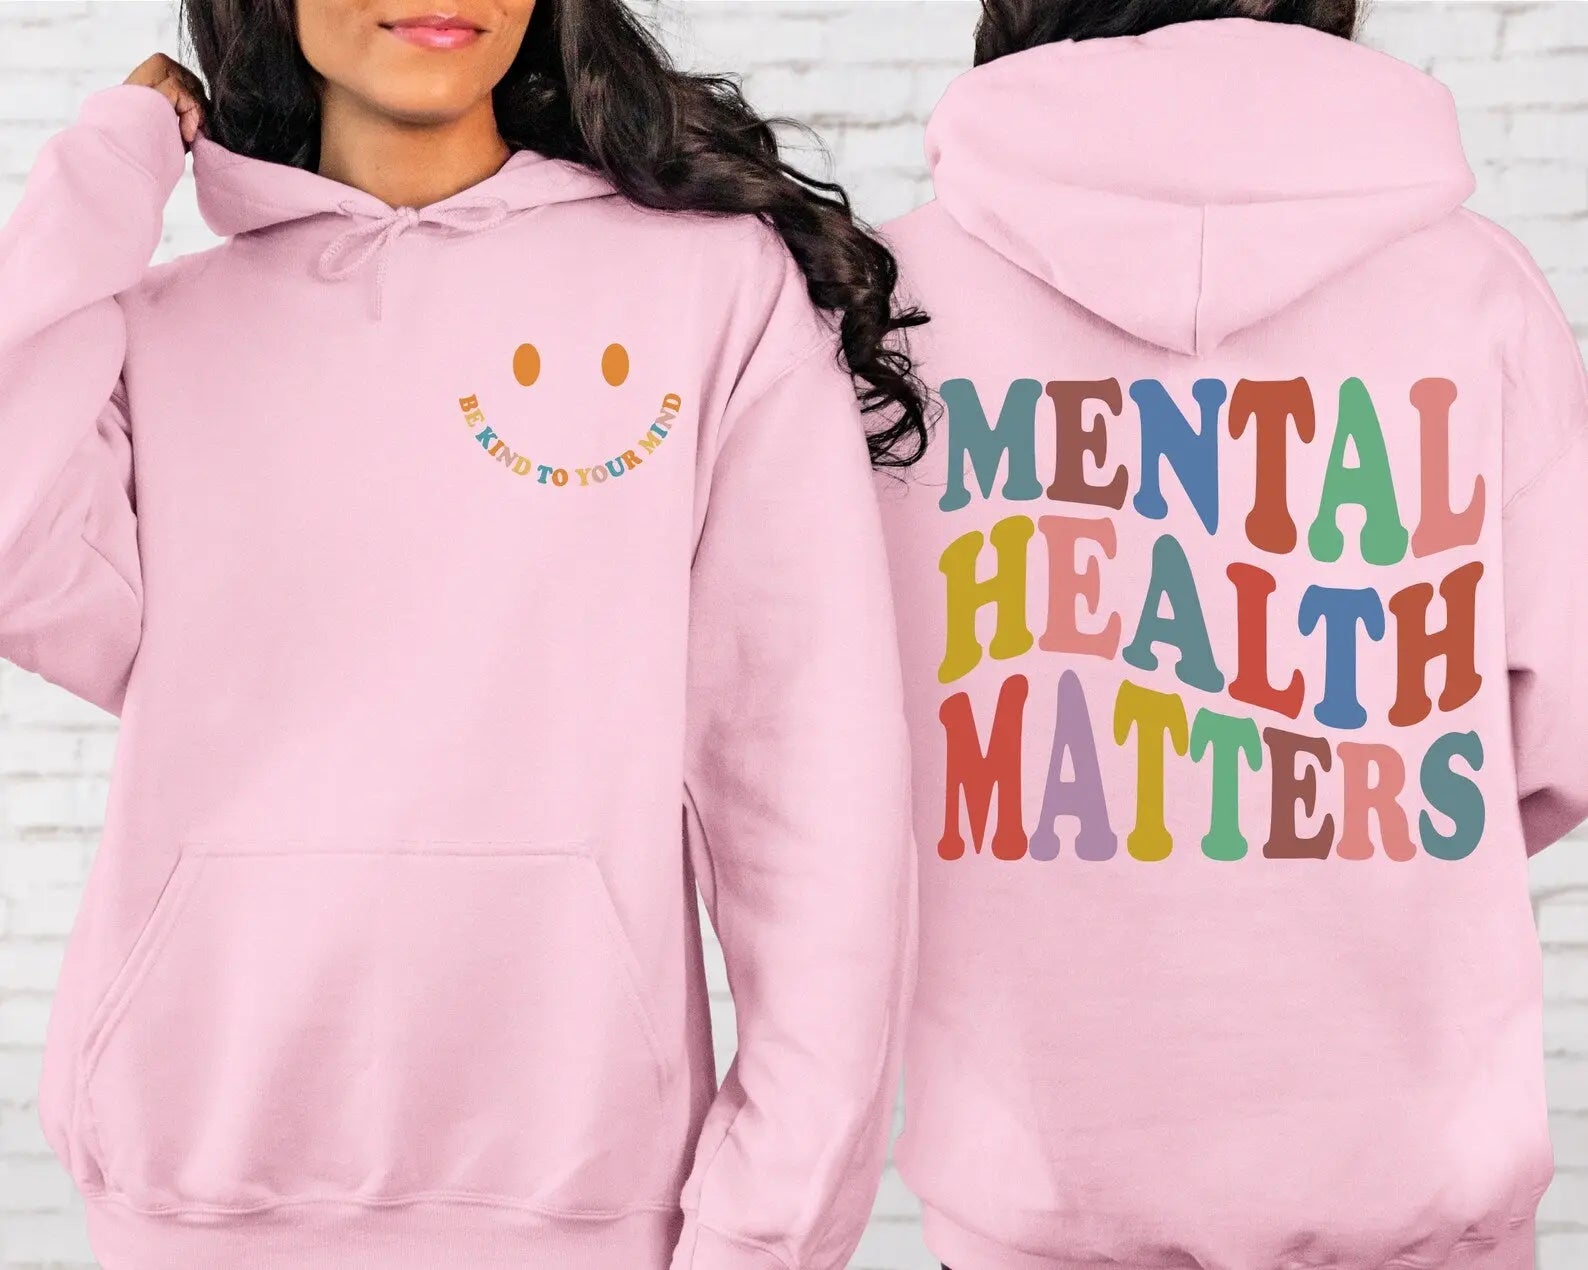 'Be Kind To Your Mind' Hoodie